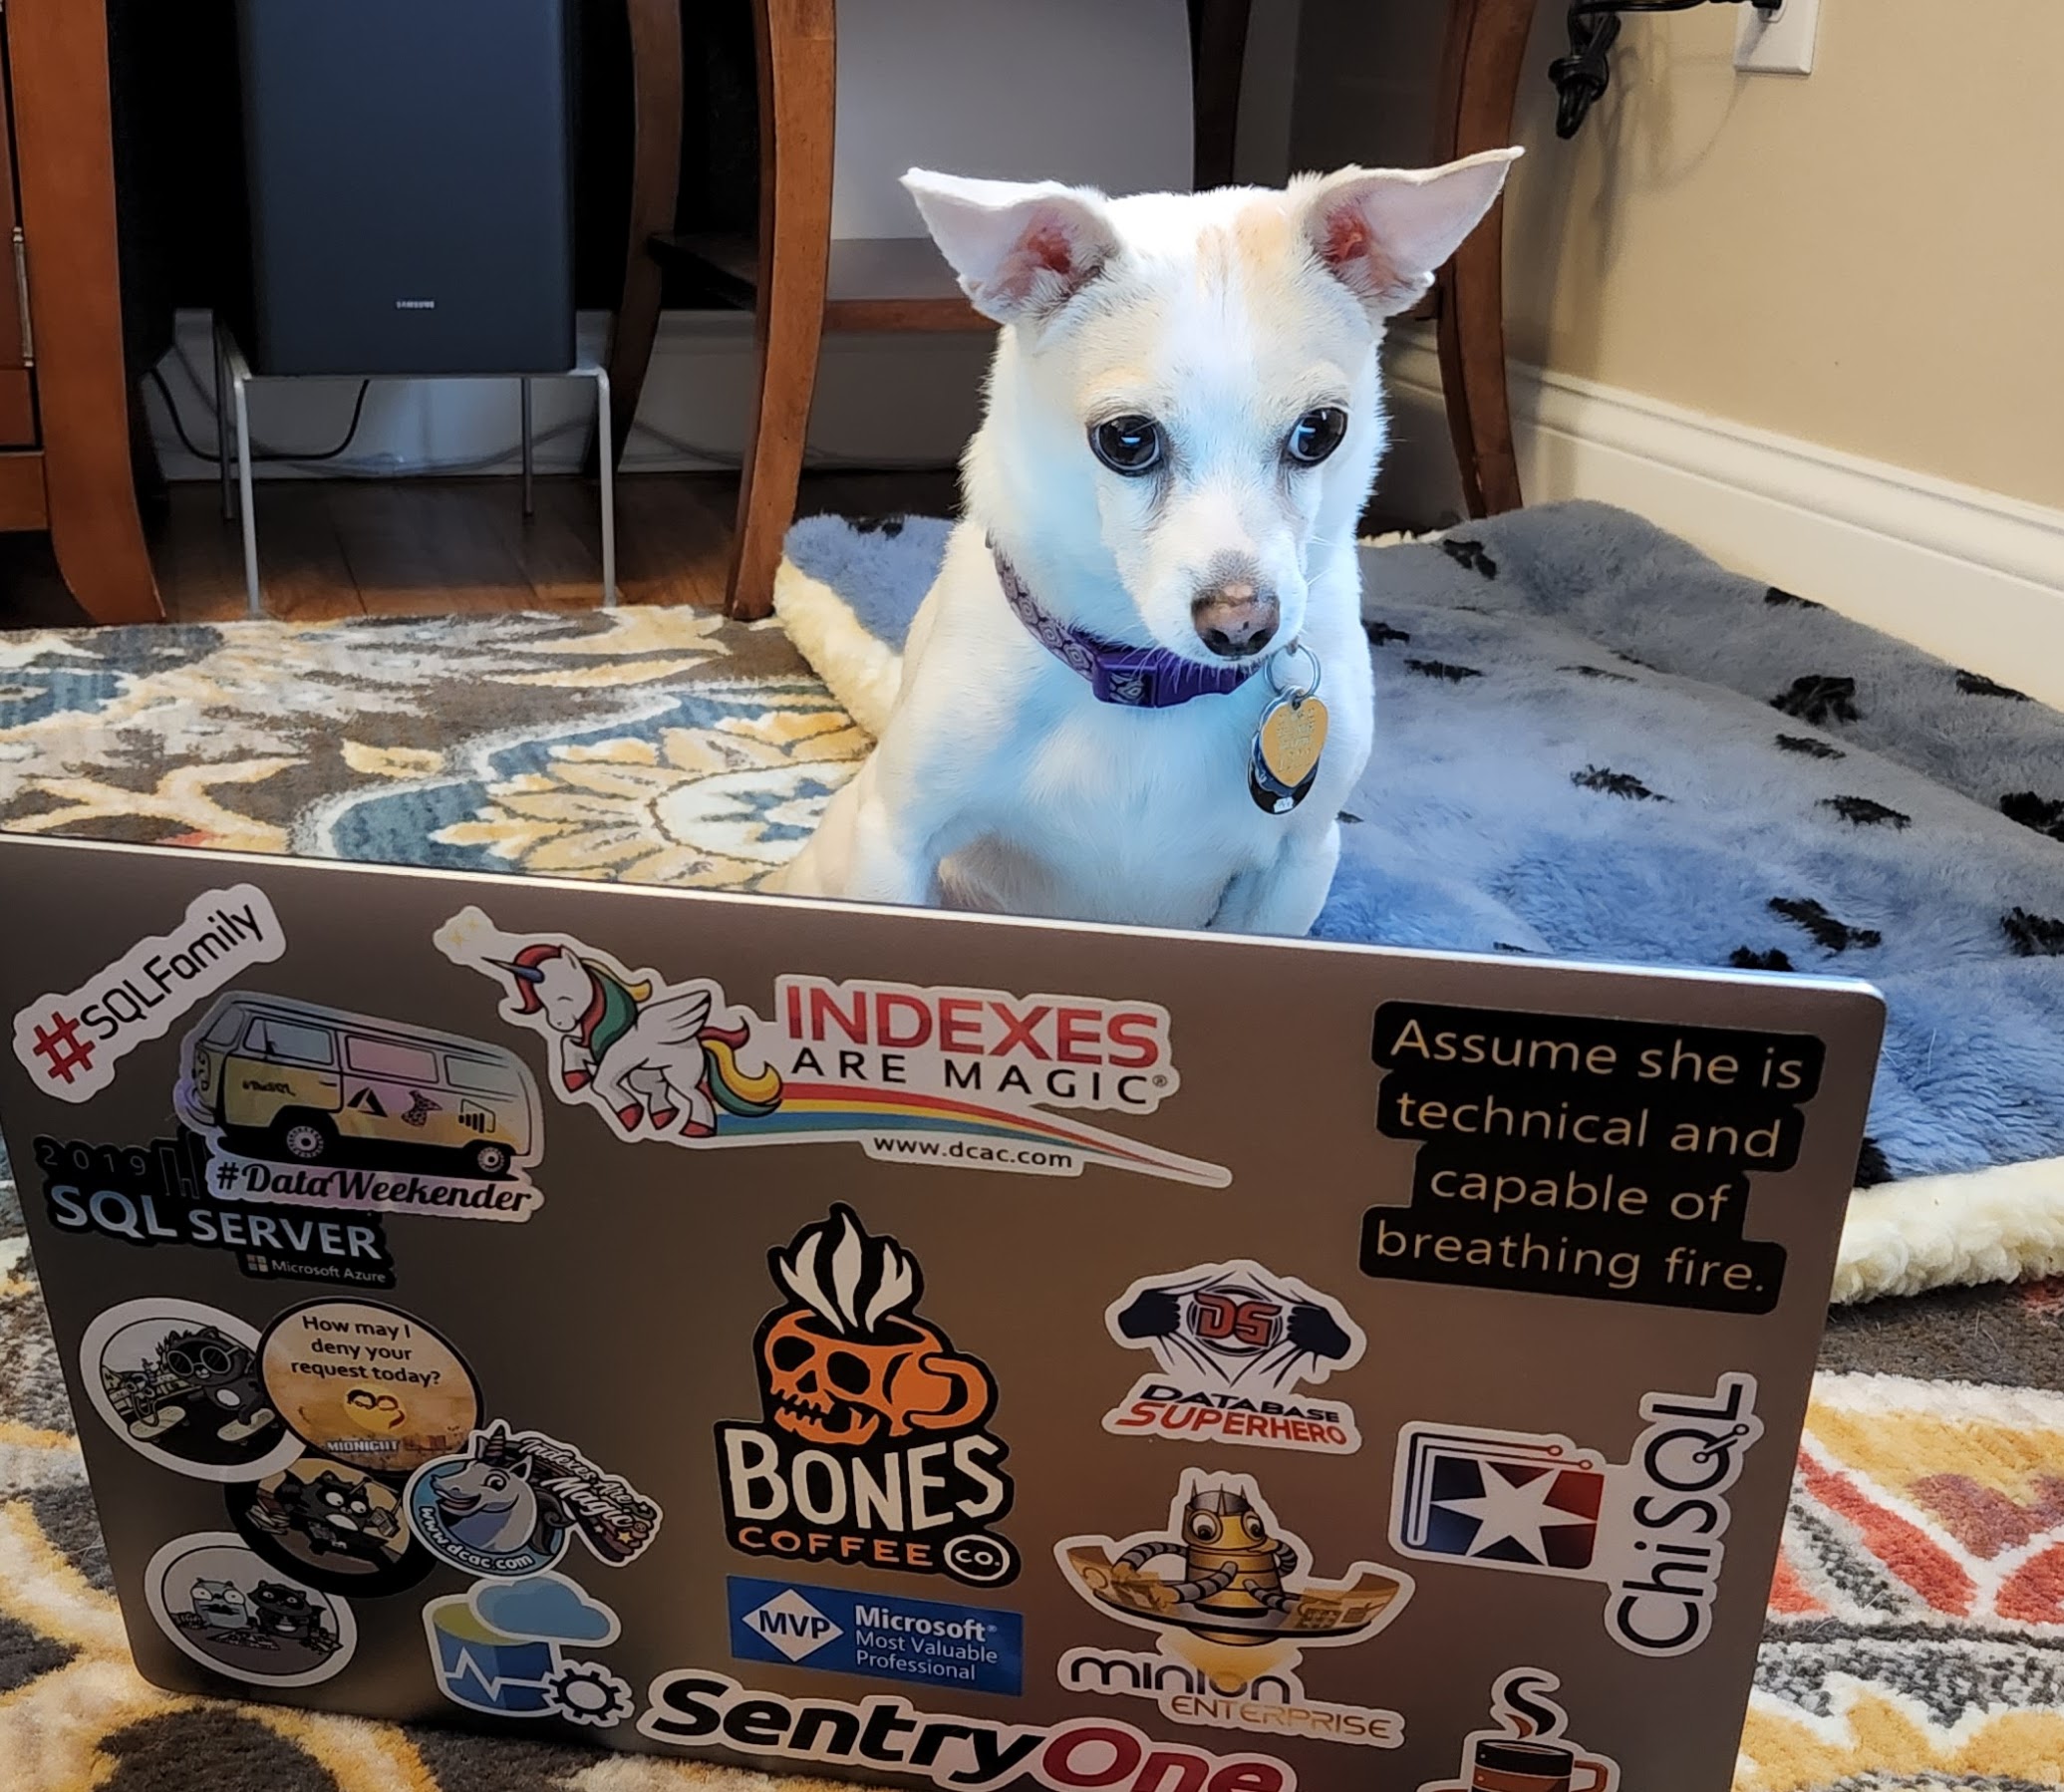 Sebastian, the chihuahua mix, is sitting in front of the laptop, "reviewing the specs"